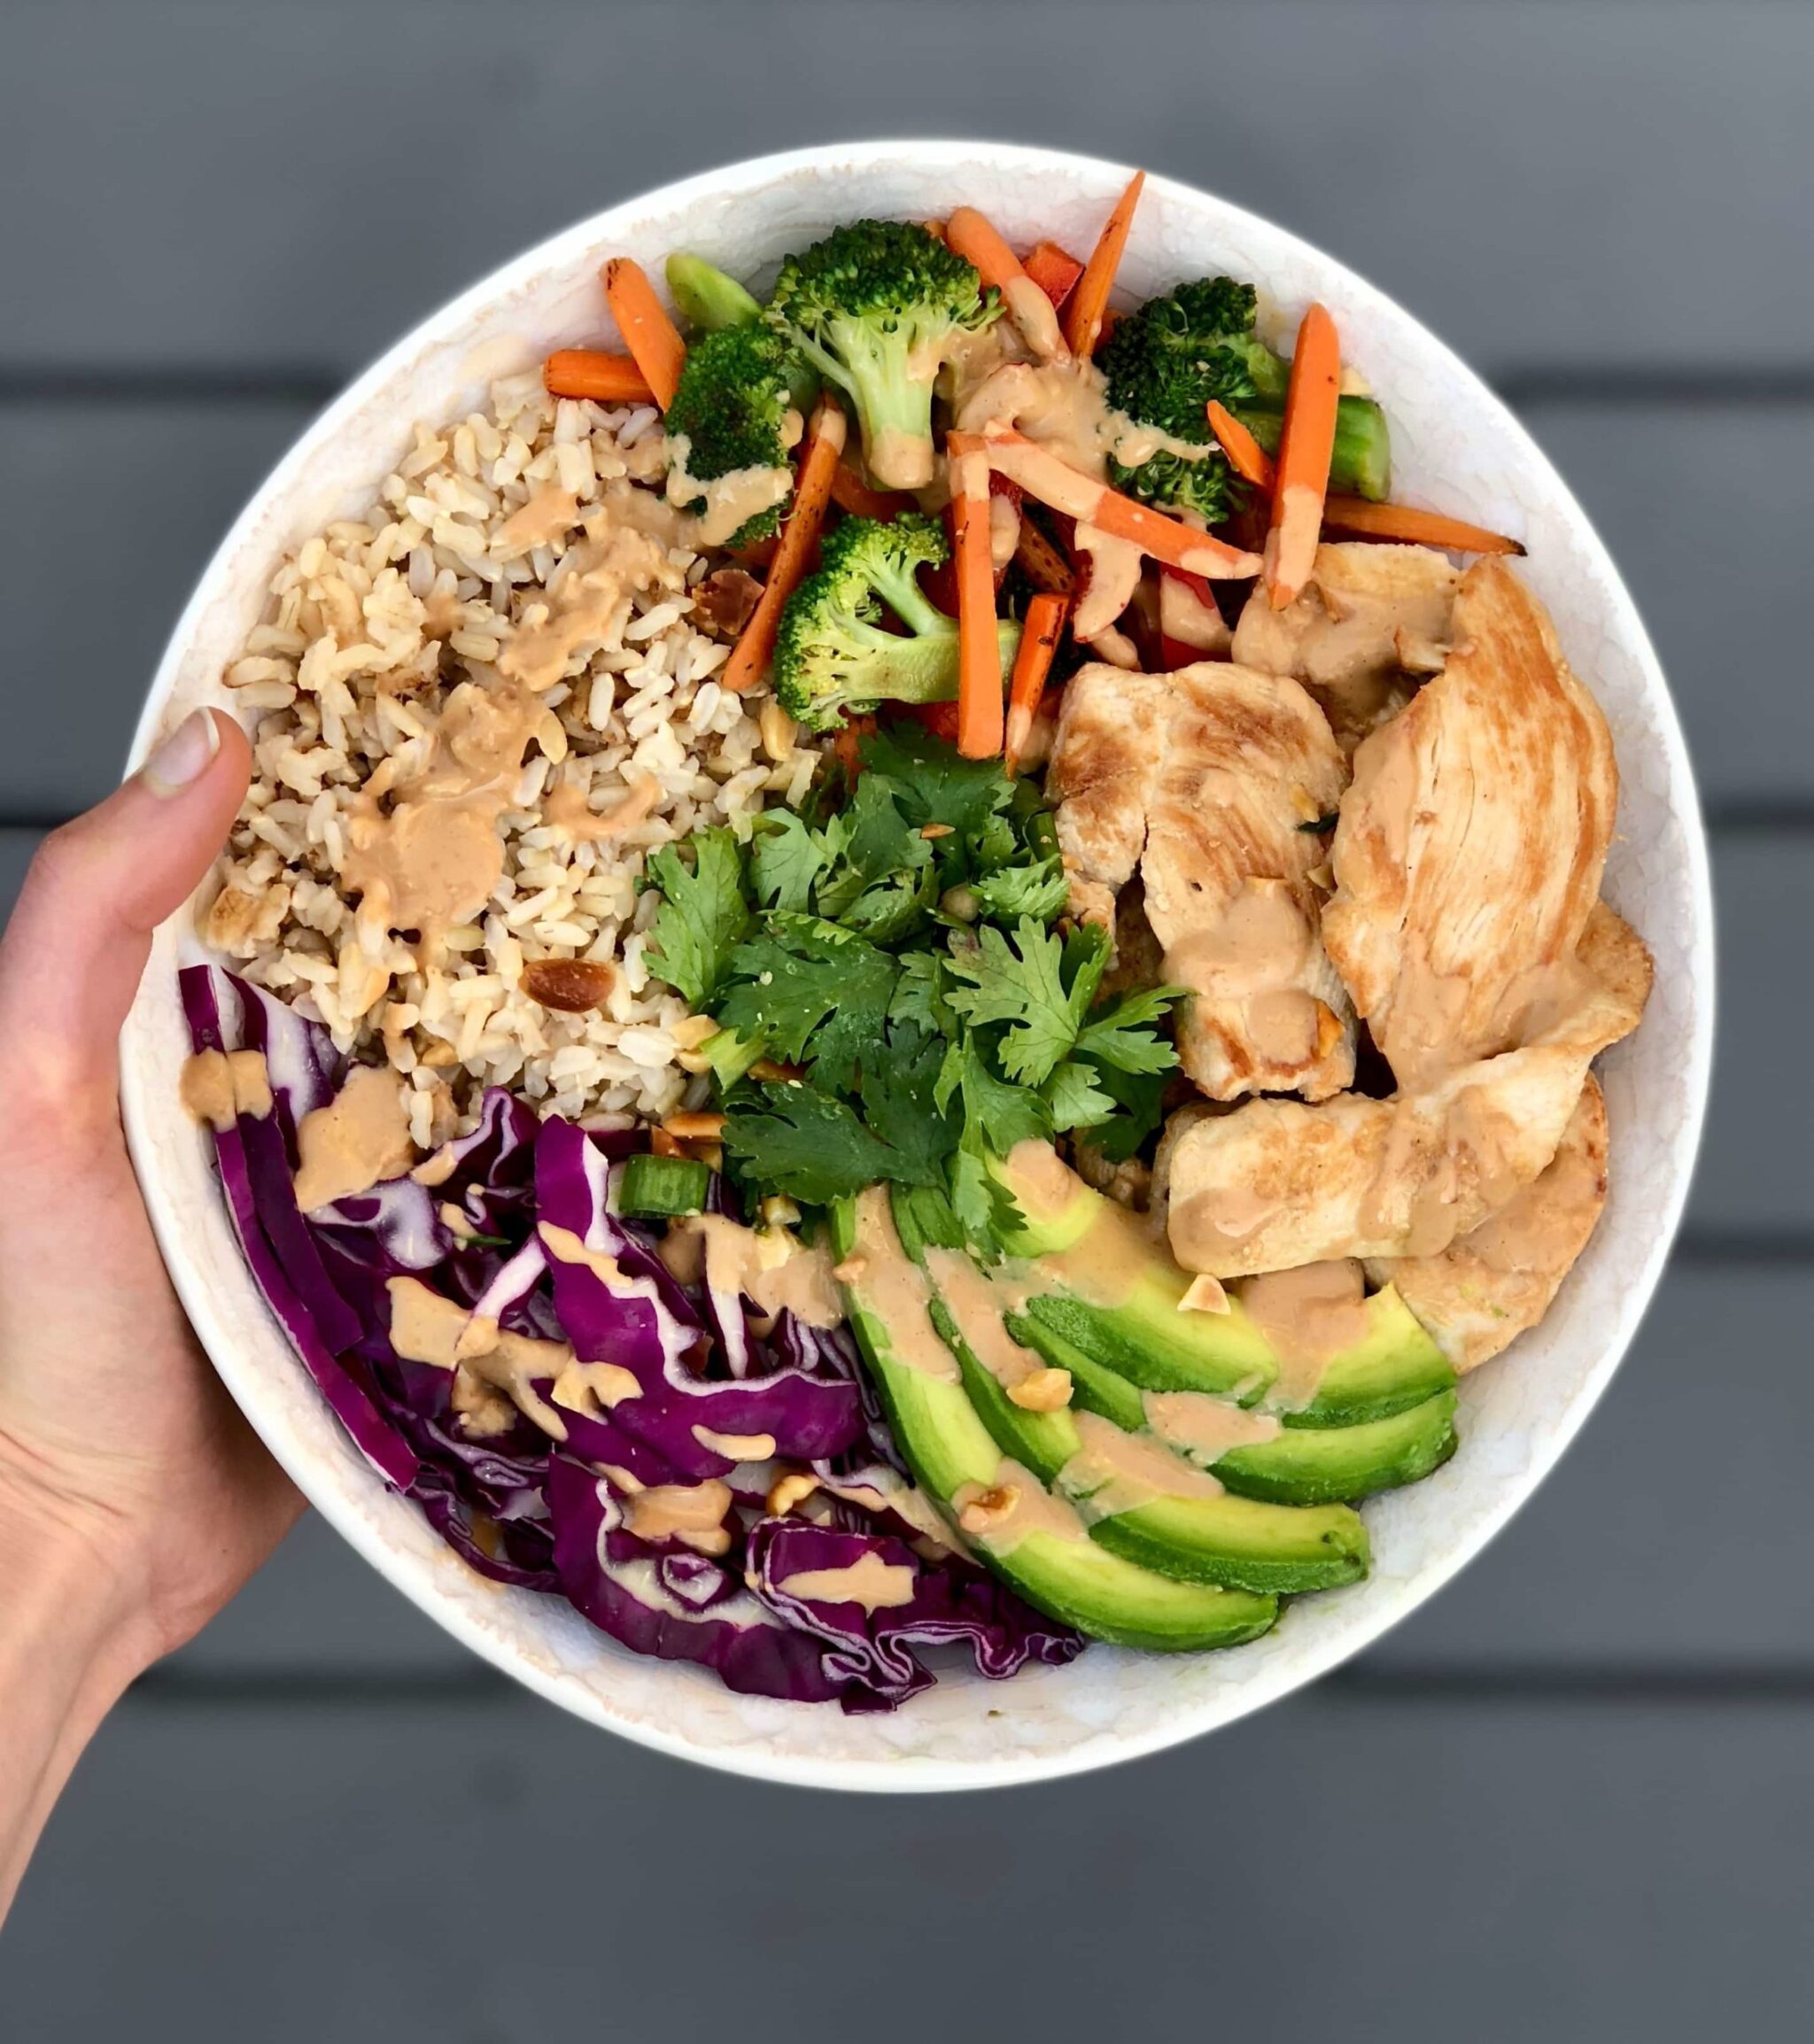 Try this delicious Thai Peanut Umami Buddha Bowl for your next meal prep, lunch, or dinner. The thai peanut sauce is liquid gold!